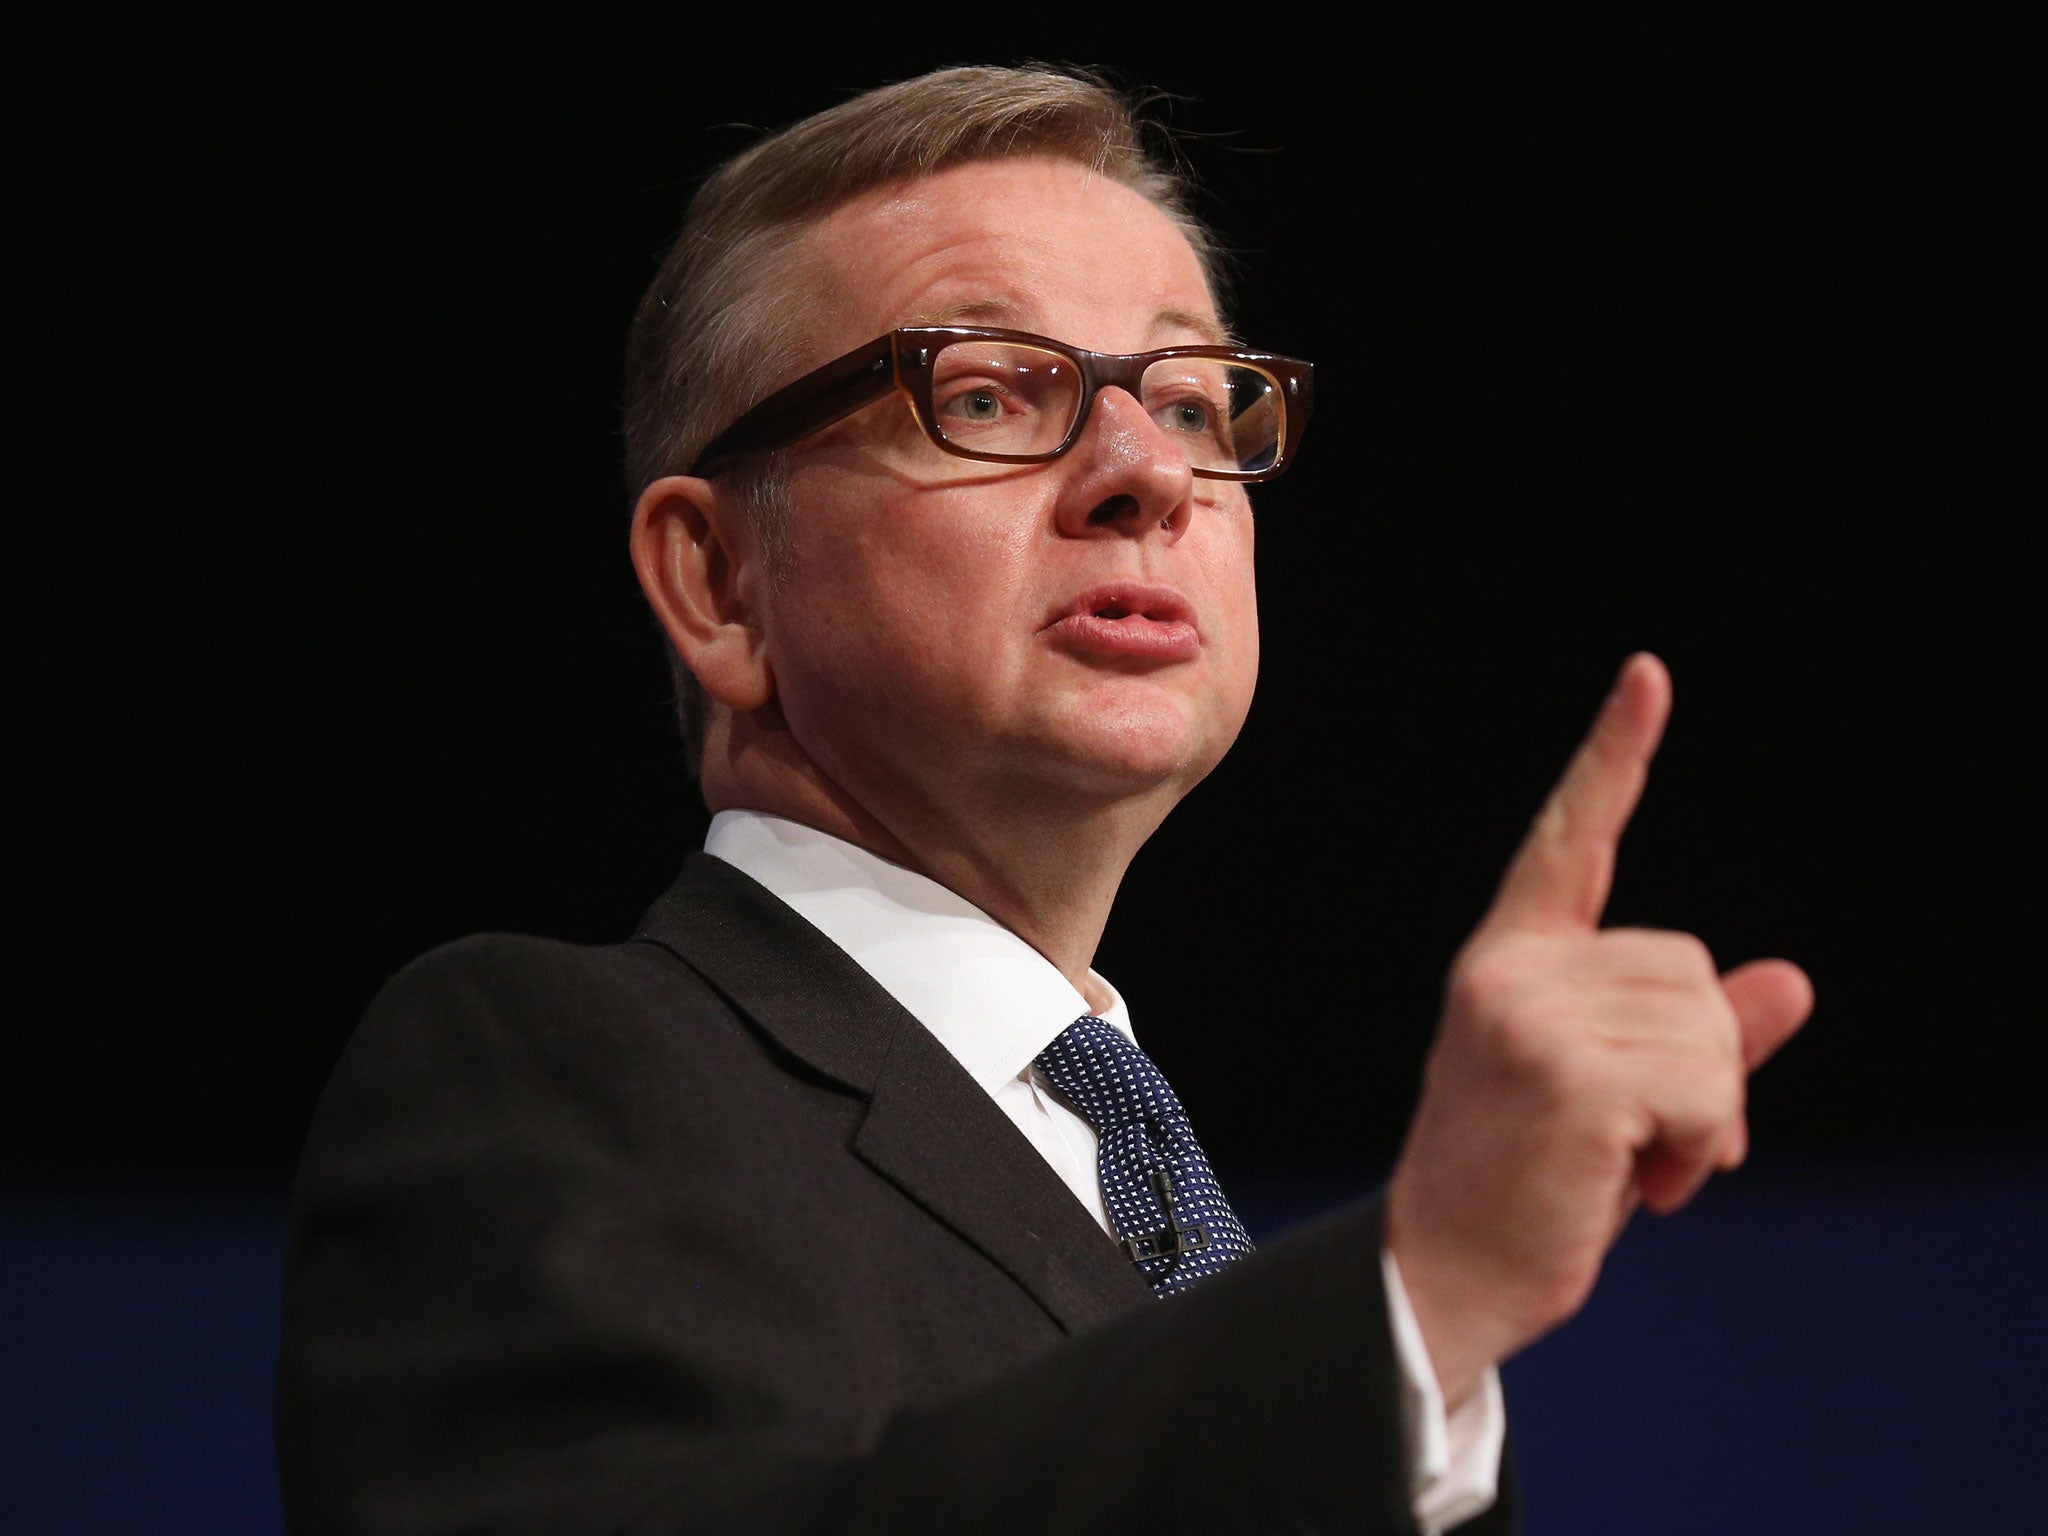 Michael Gove has criticised the way legislation limits the Government over children's care homes, ahead of a damning report into homes released today